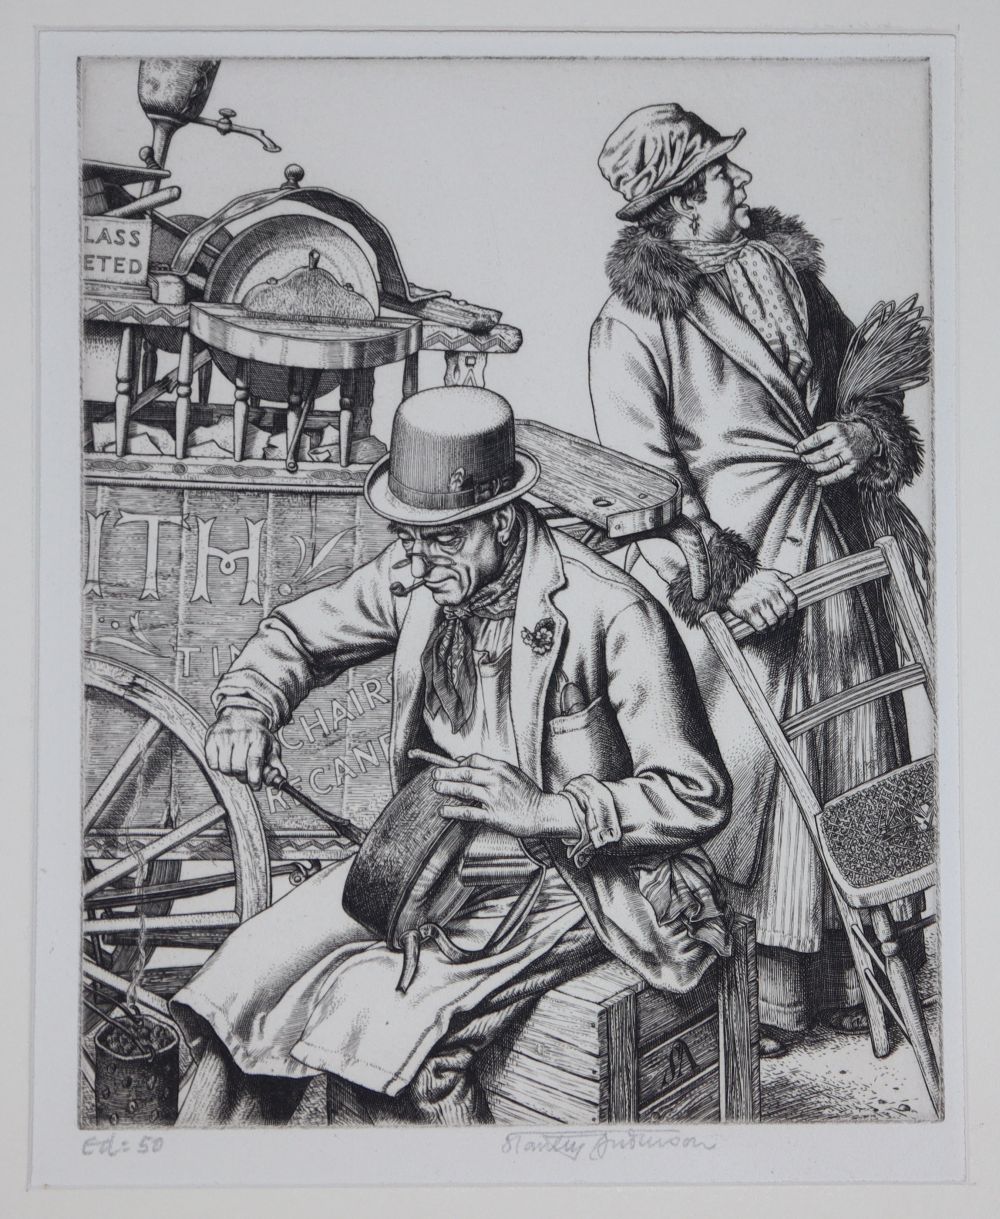 Stanley Anderson (1884-1966), line engraving, The Old Tinker, signed and inscribed Ed 50, 17.5 x 14cm, unframed